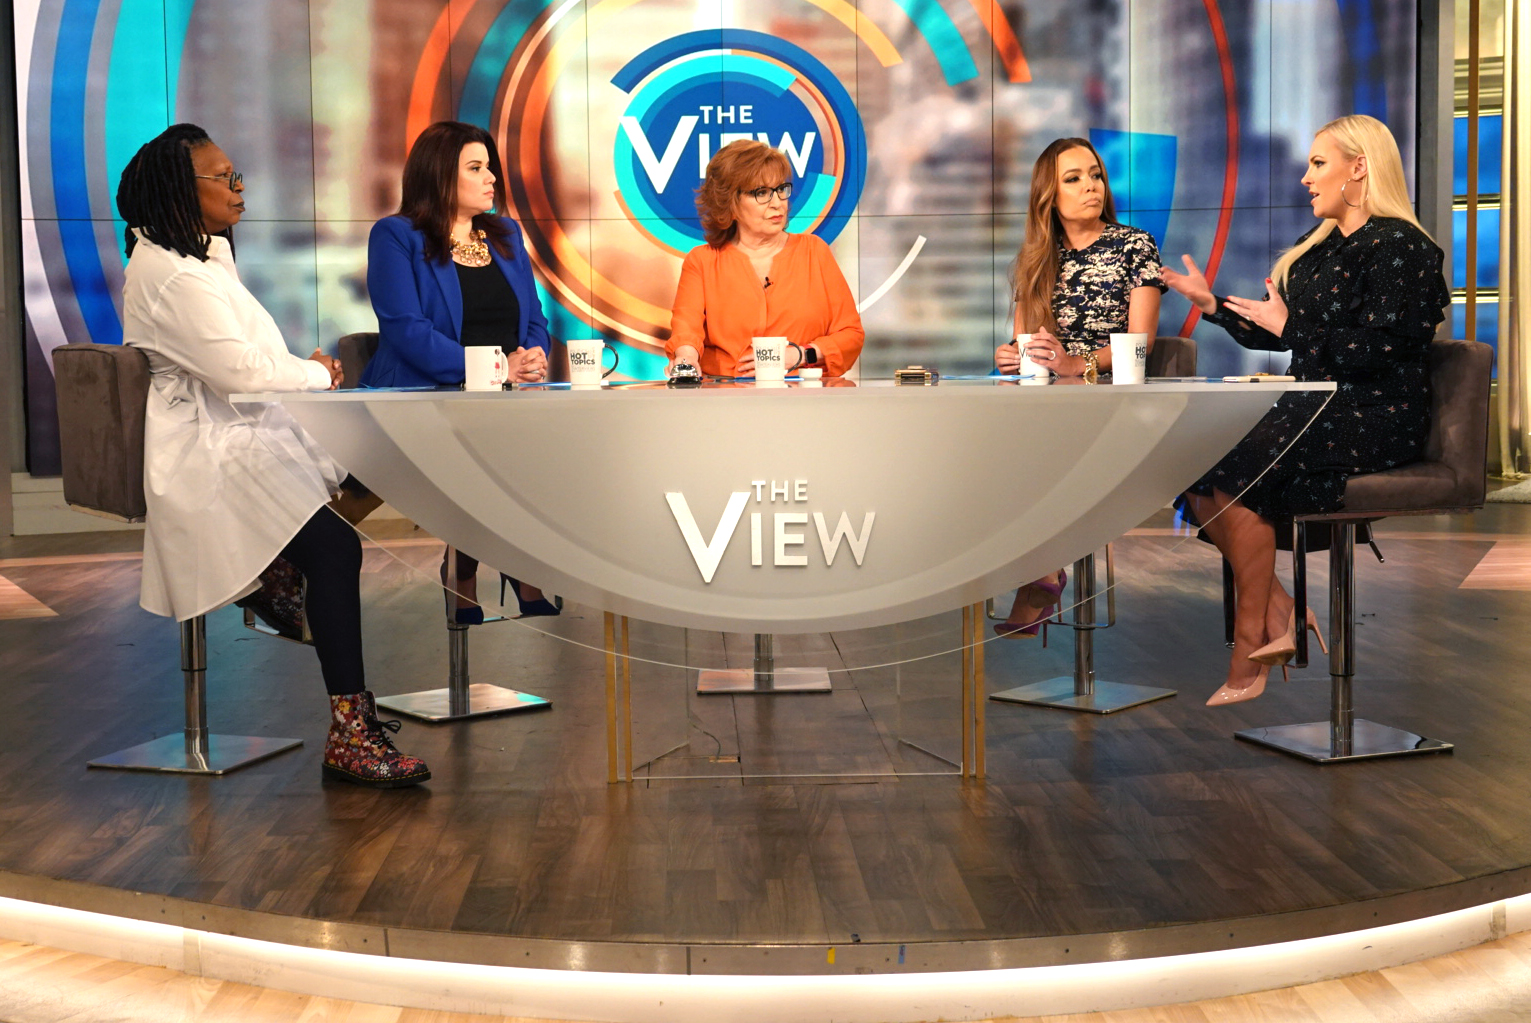 PHOTO: "The View" co-hosts Whoopi Goldberg, Ana Navarro, Joy Behar, Sunny Hostin, and Meghan McCain discuss what they'd do if a friend's significant other was seen using a dating app on Monday, May 13, 2019.